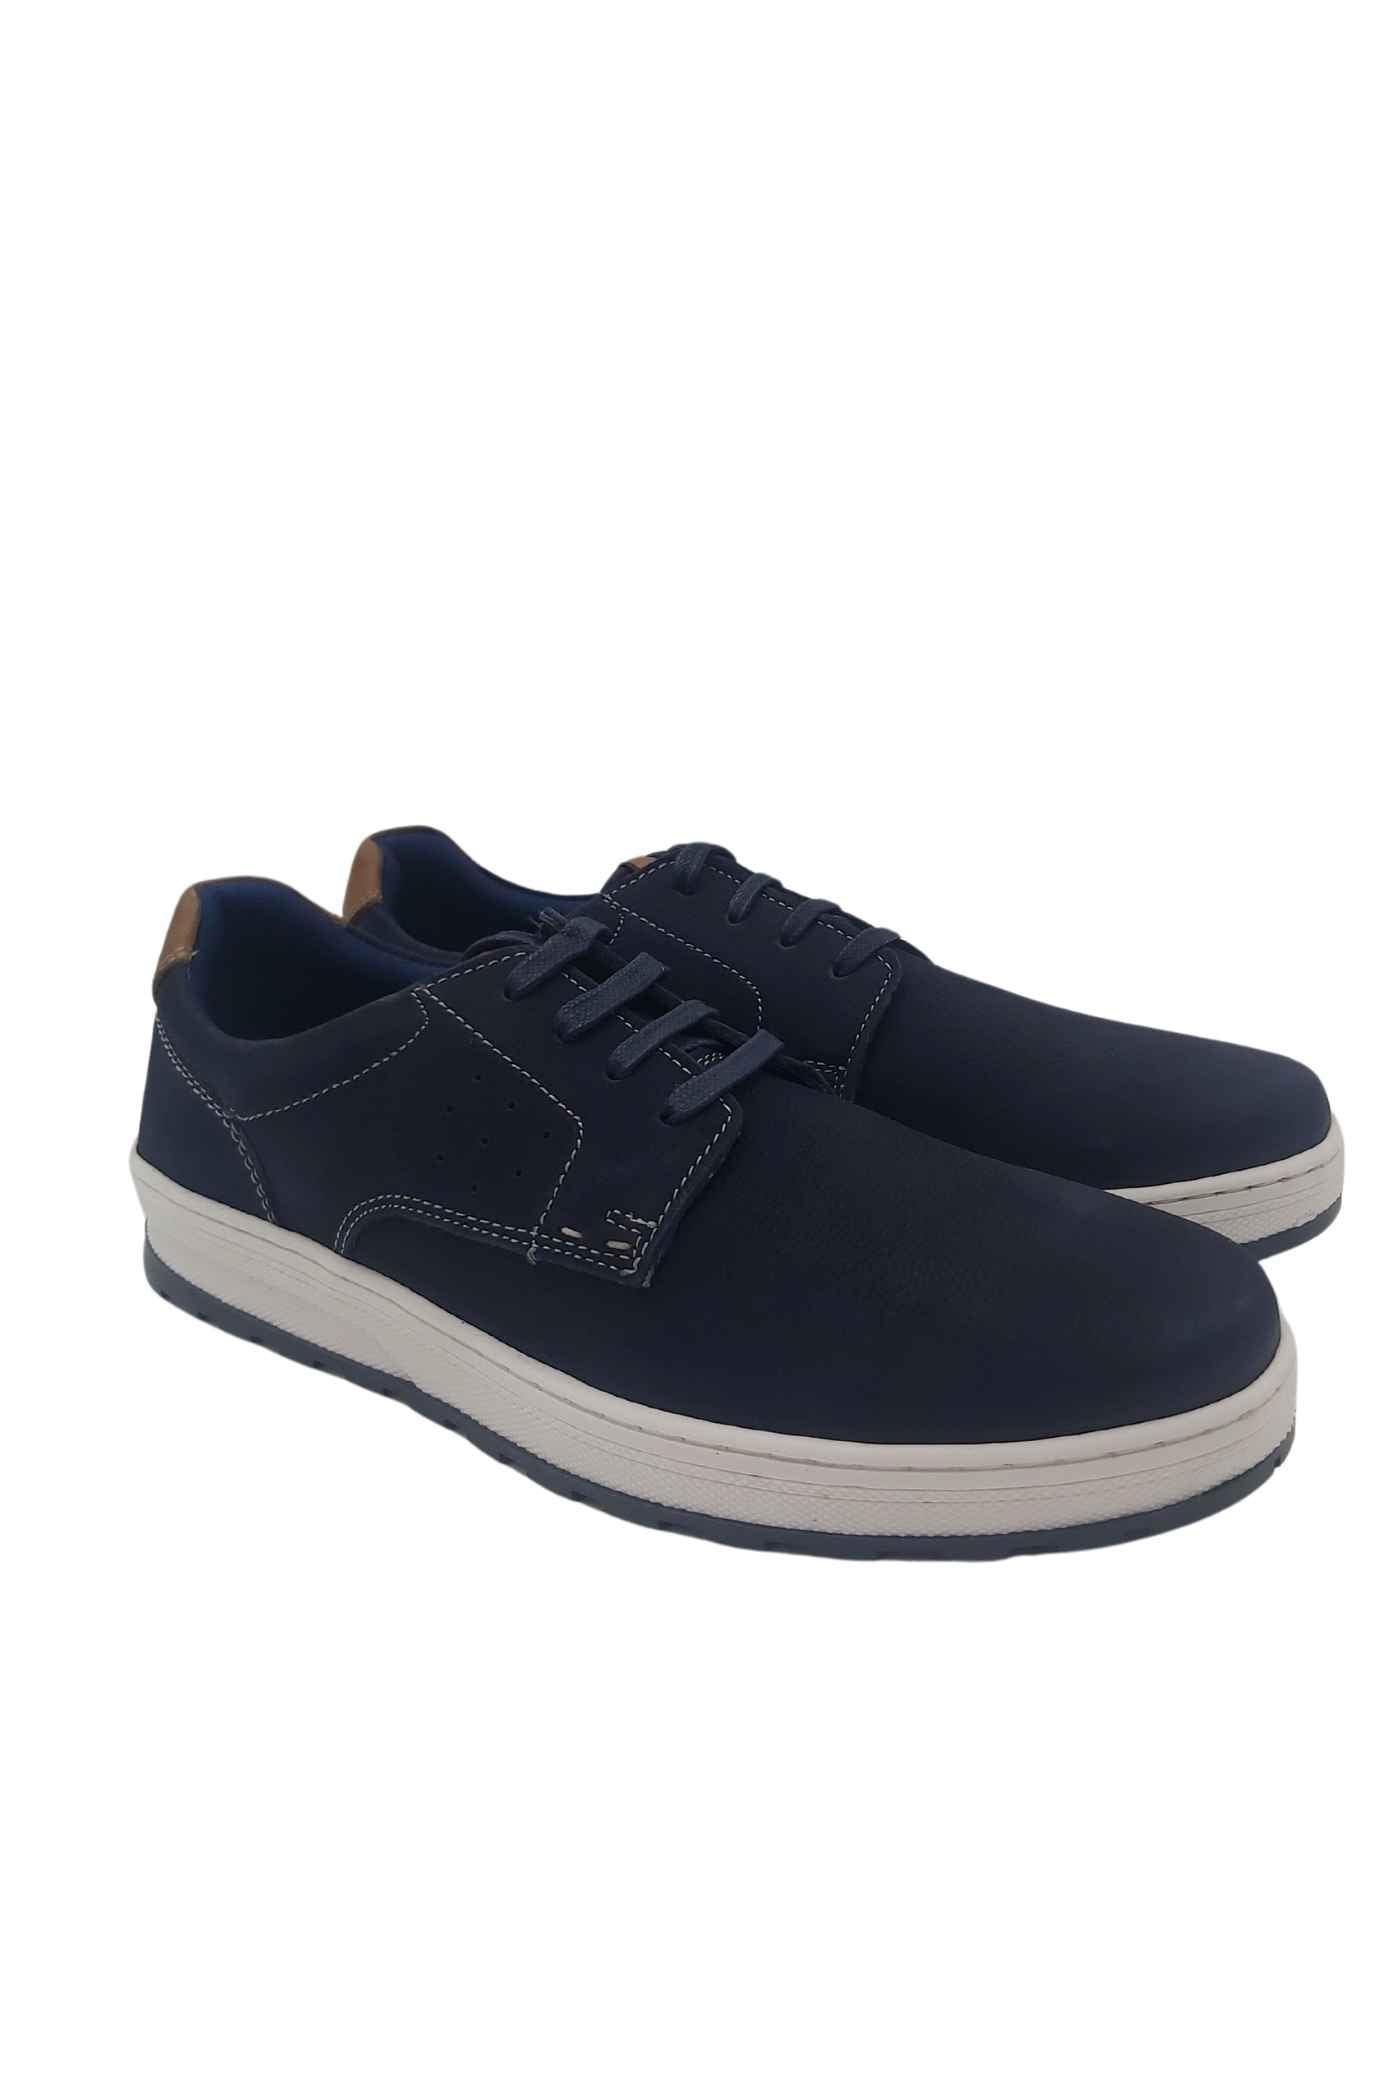 Men's Daly Navy Smart Casual Shoe-Side/Front View